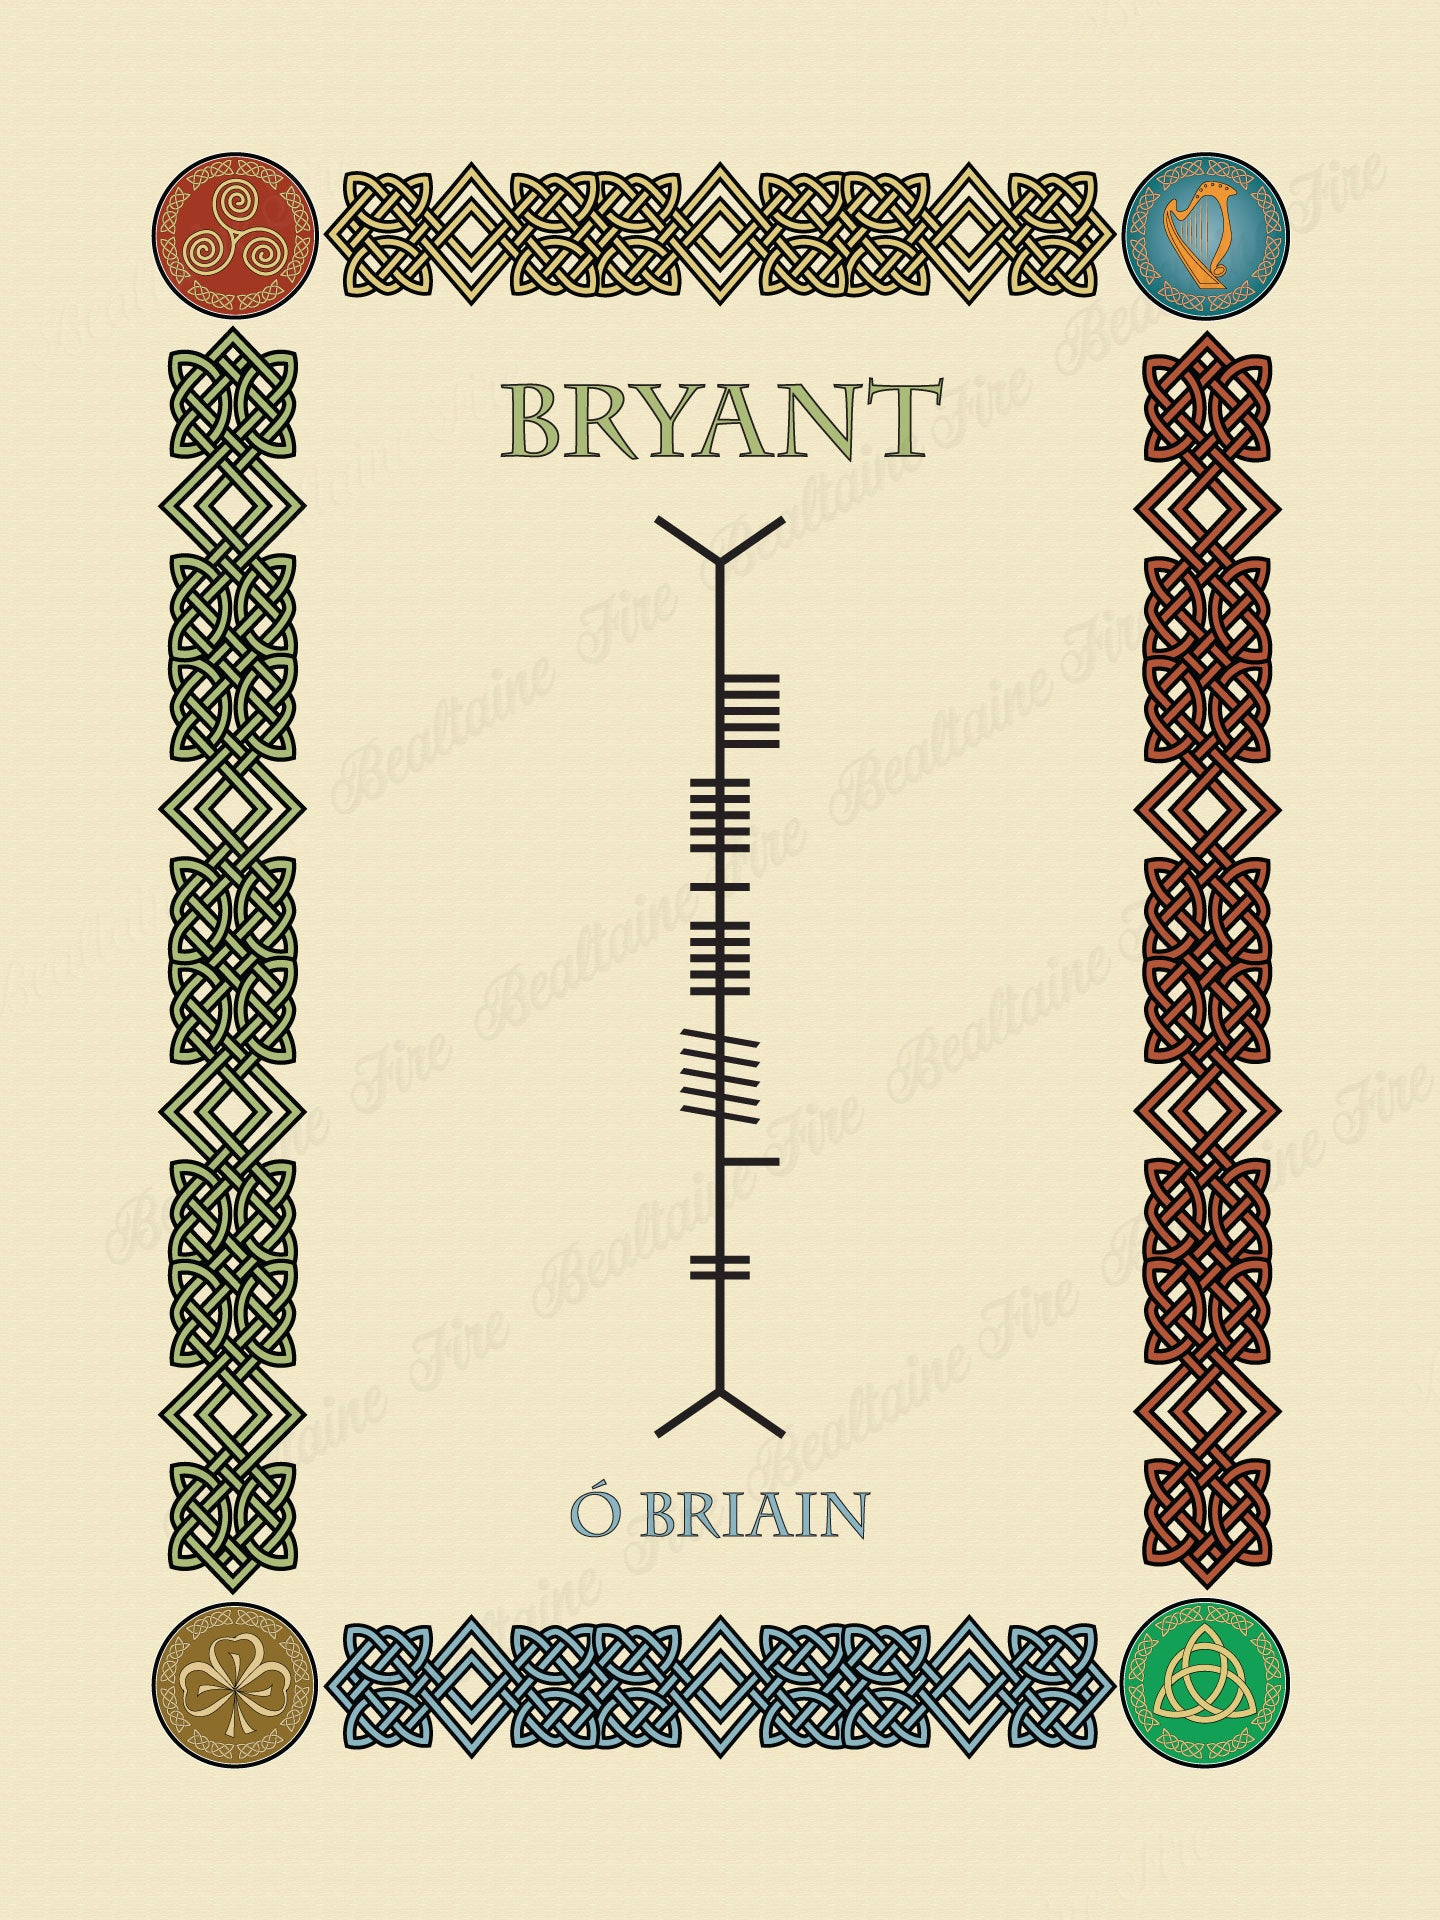 Bryant in Old Irish and Ogham - Premium luster unframed print